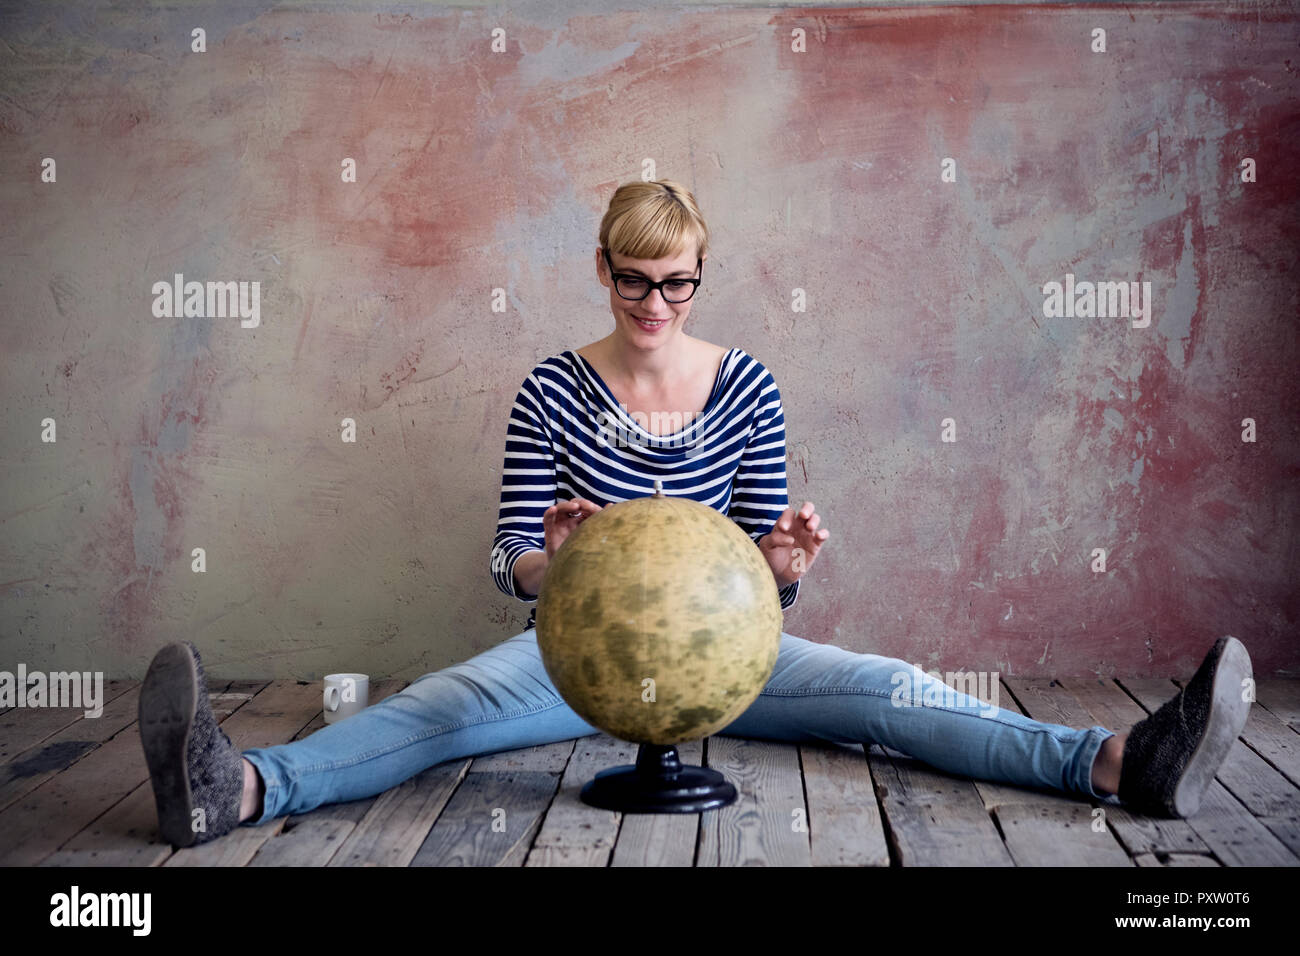 Smiling woman sitting on wooden floor in an unrenovated room looking at globe Stock Photo